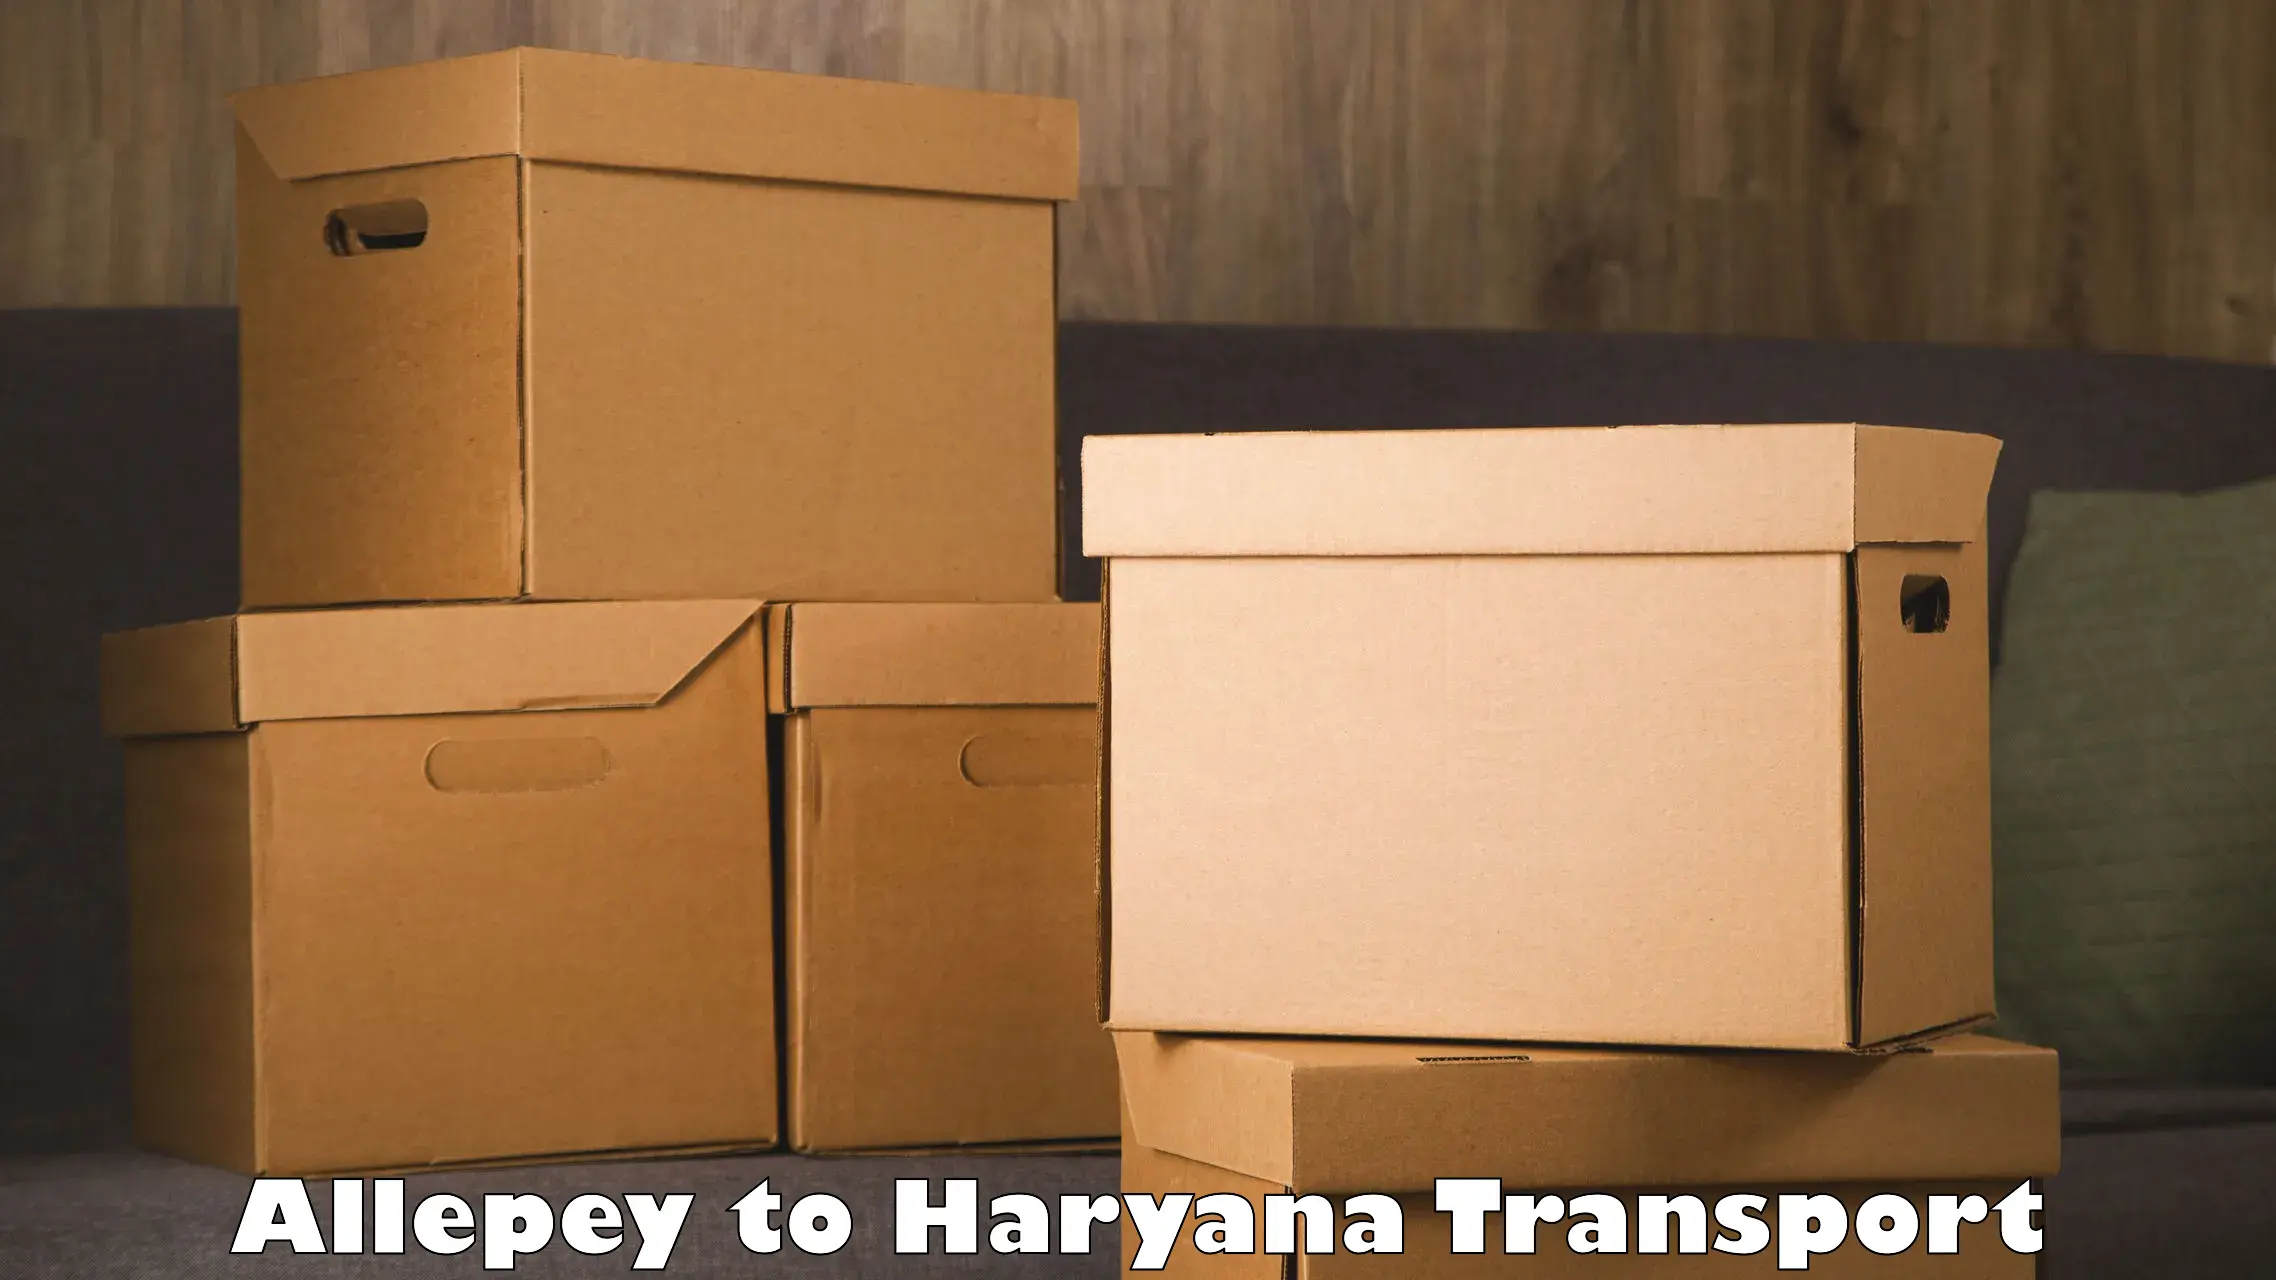 Commercial transport service Allepey to Haryana